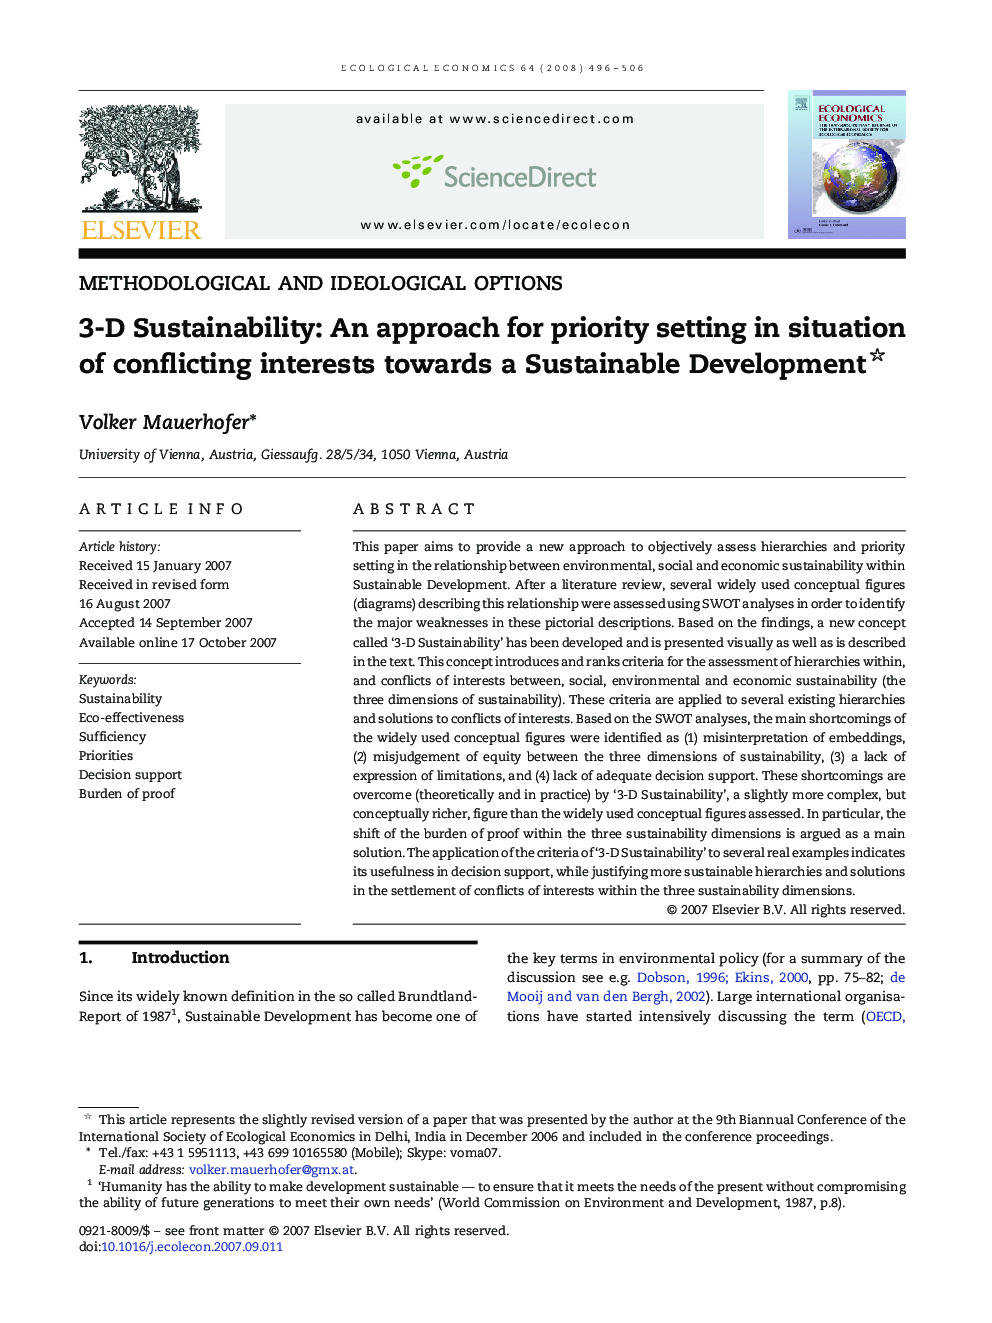 3-D Sustainability: An approach for priority setting in situation of conflicting interests towards a Sustainable Development